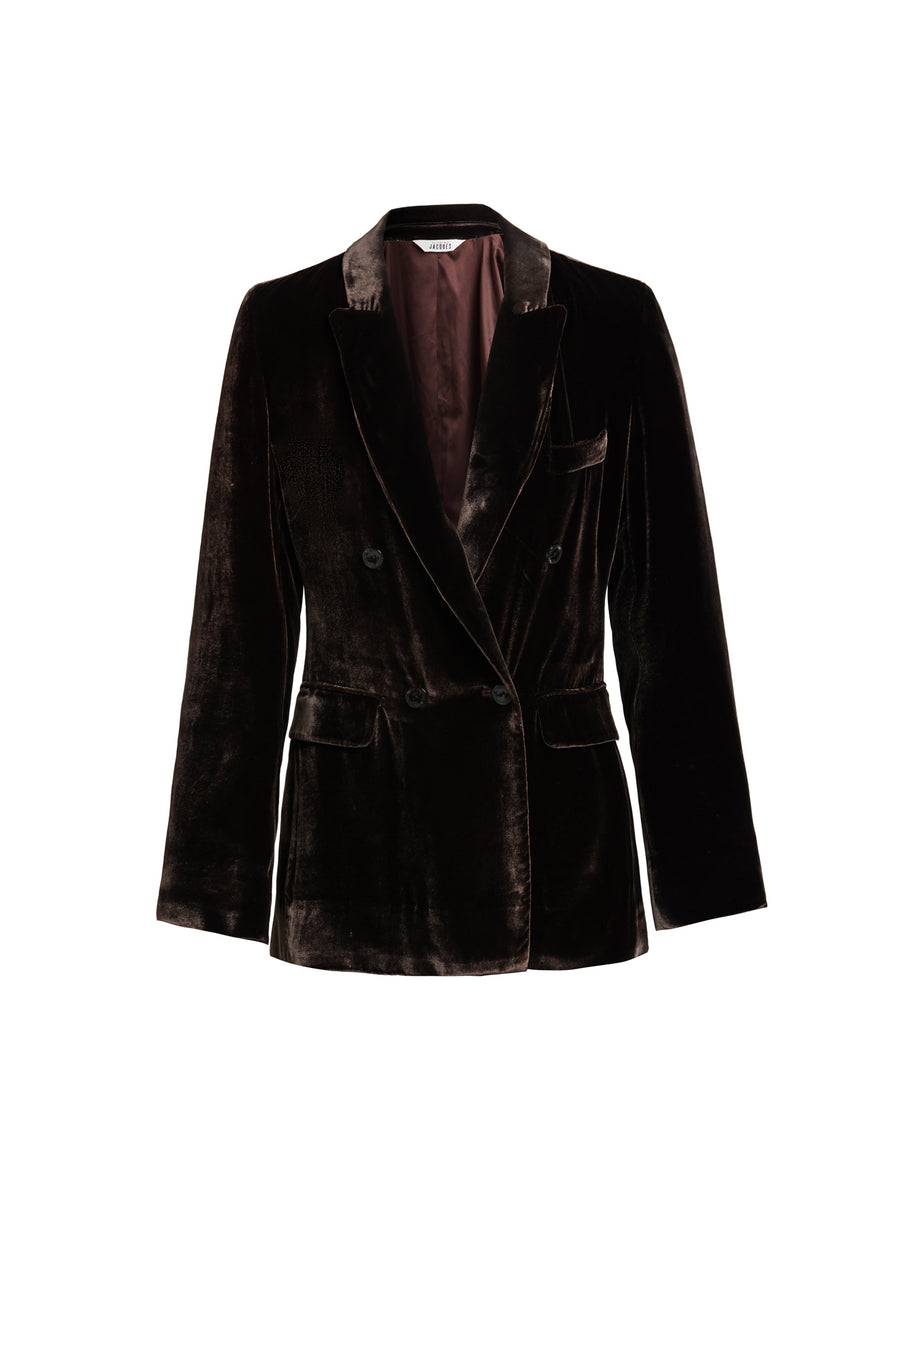 sav offentlig solo The Jane Bond double breasted silk velvet suit blazer in Chocolate Brown:  SWJ – SLEEPING WITH JACQUES